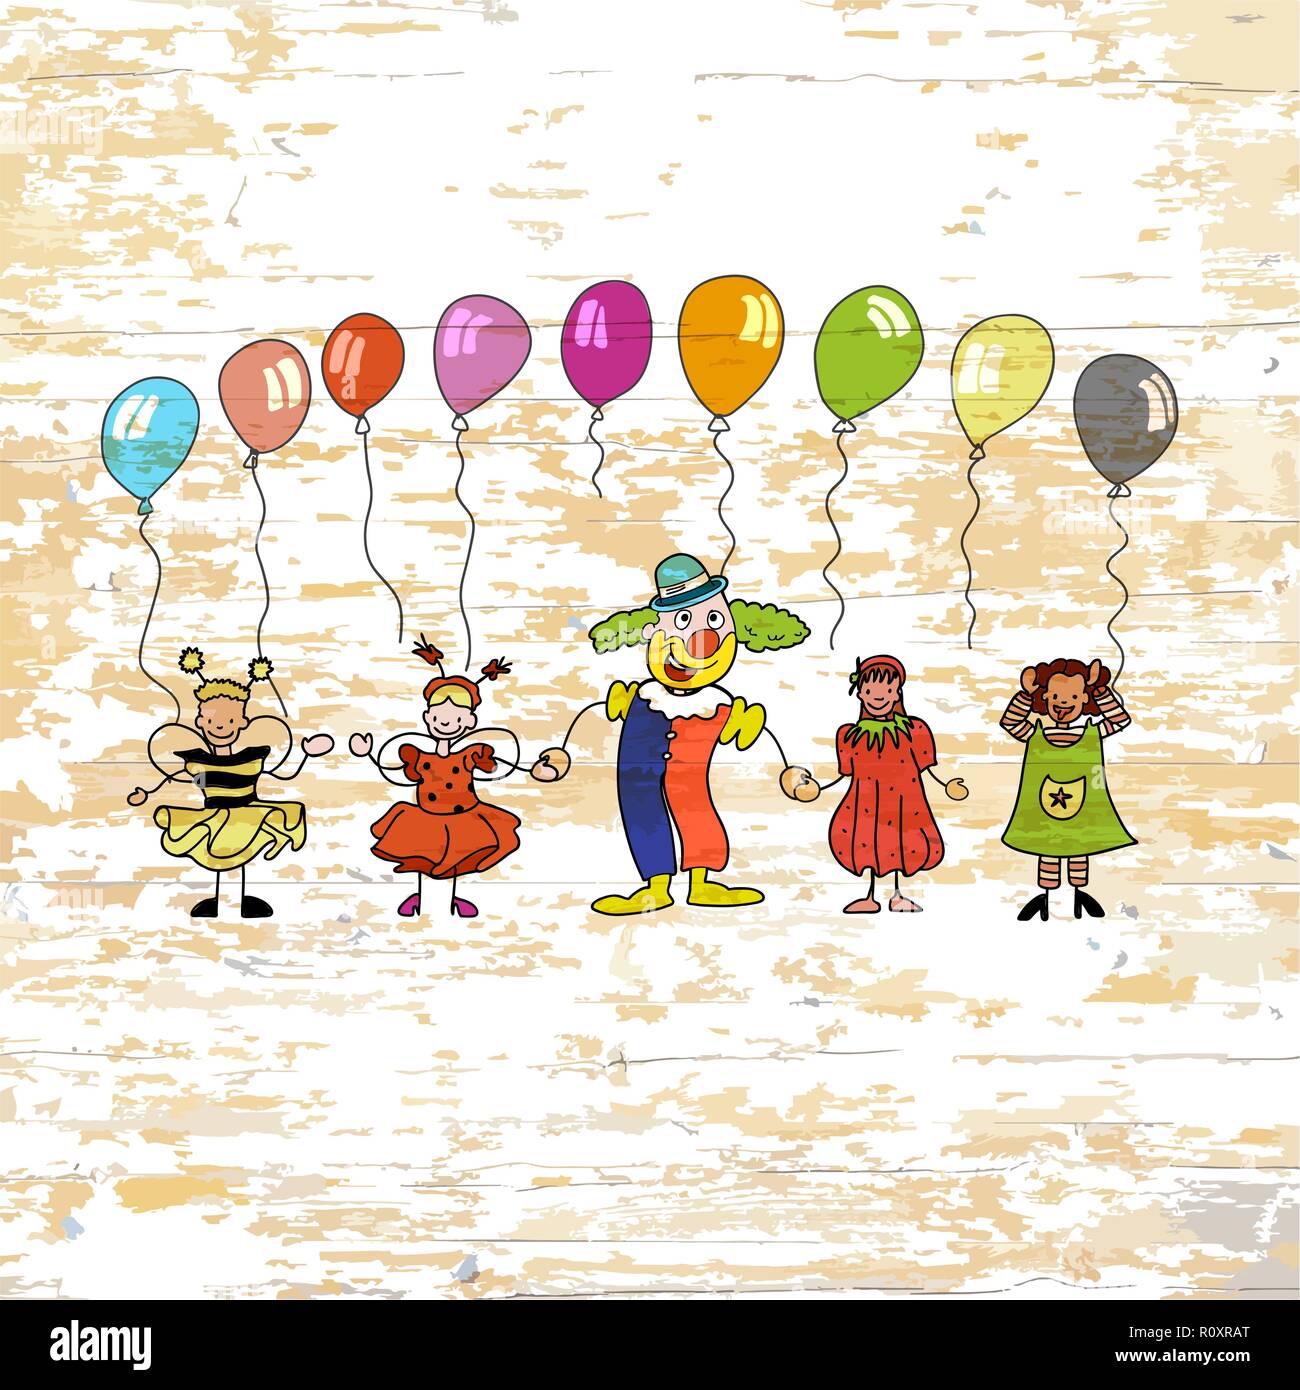 Kindergarten kids with balloons on wooden background. Vector illustration drawn by hand. Stock Vector